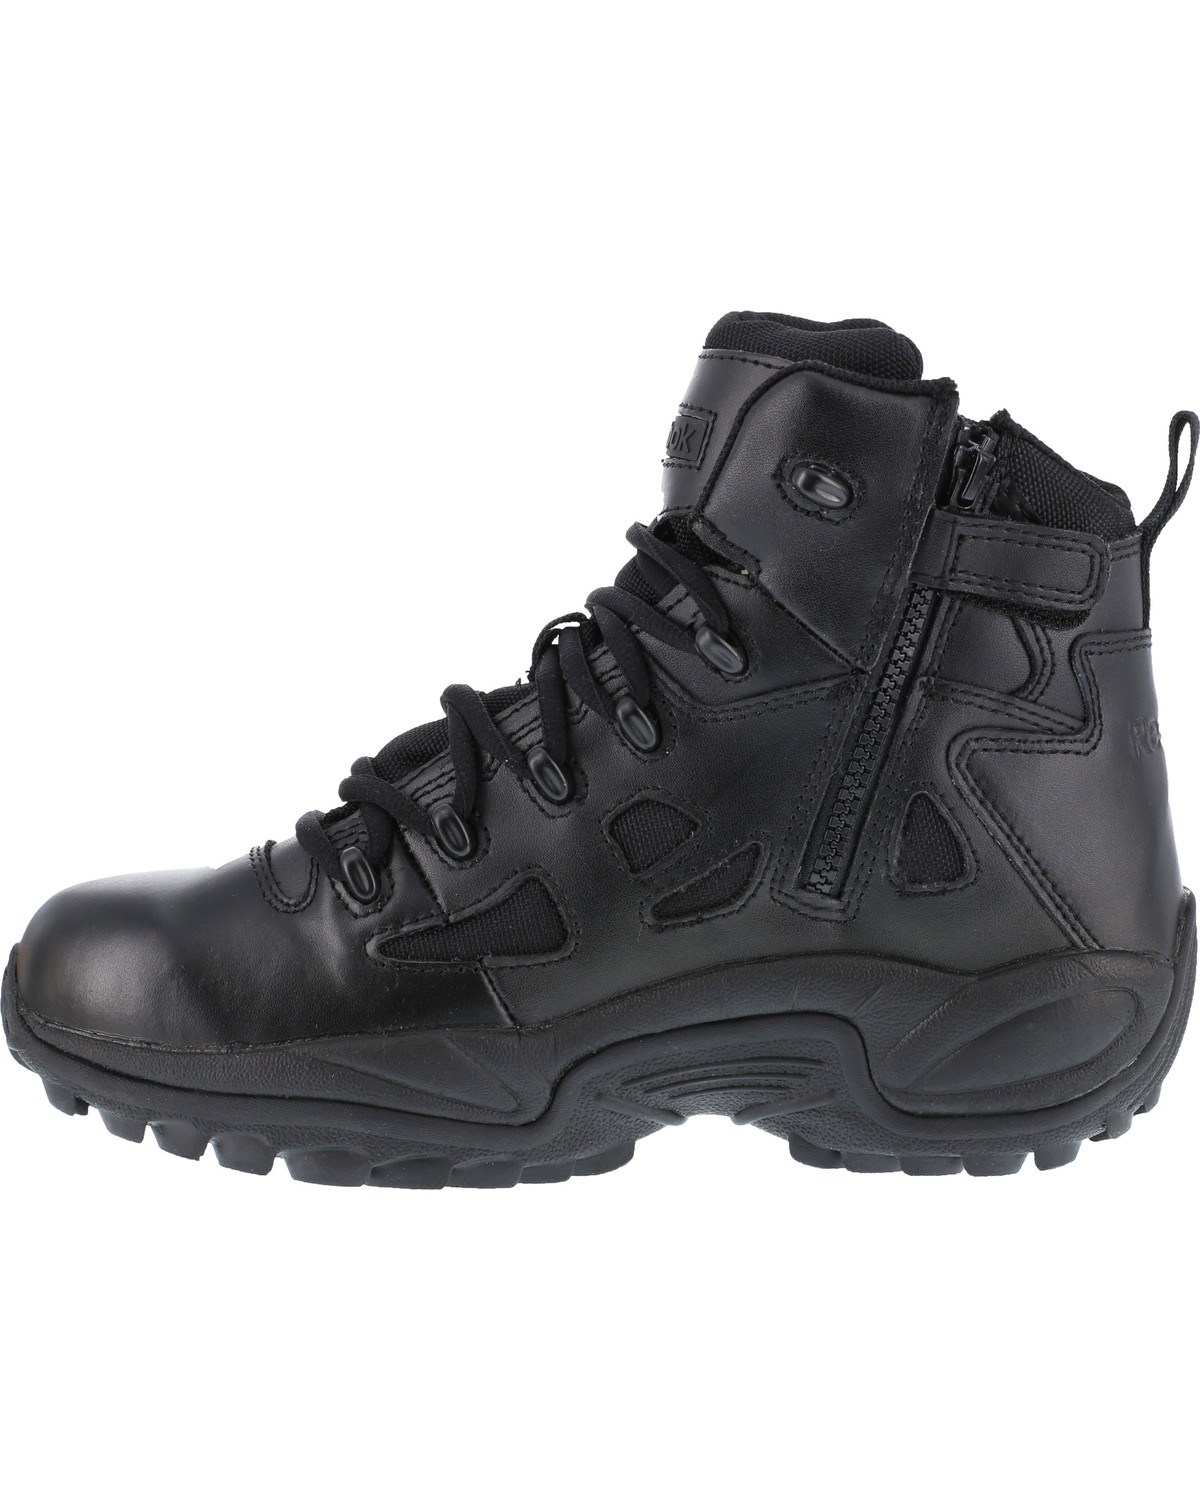 Reebok Work  Mens Rapid Response Rb 6 Inch Side Zip   Work Safety Shoes Casual - image 4 of 5